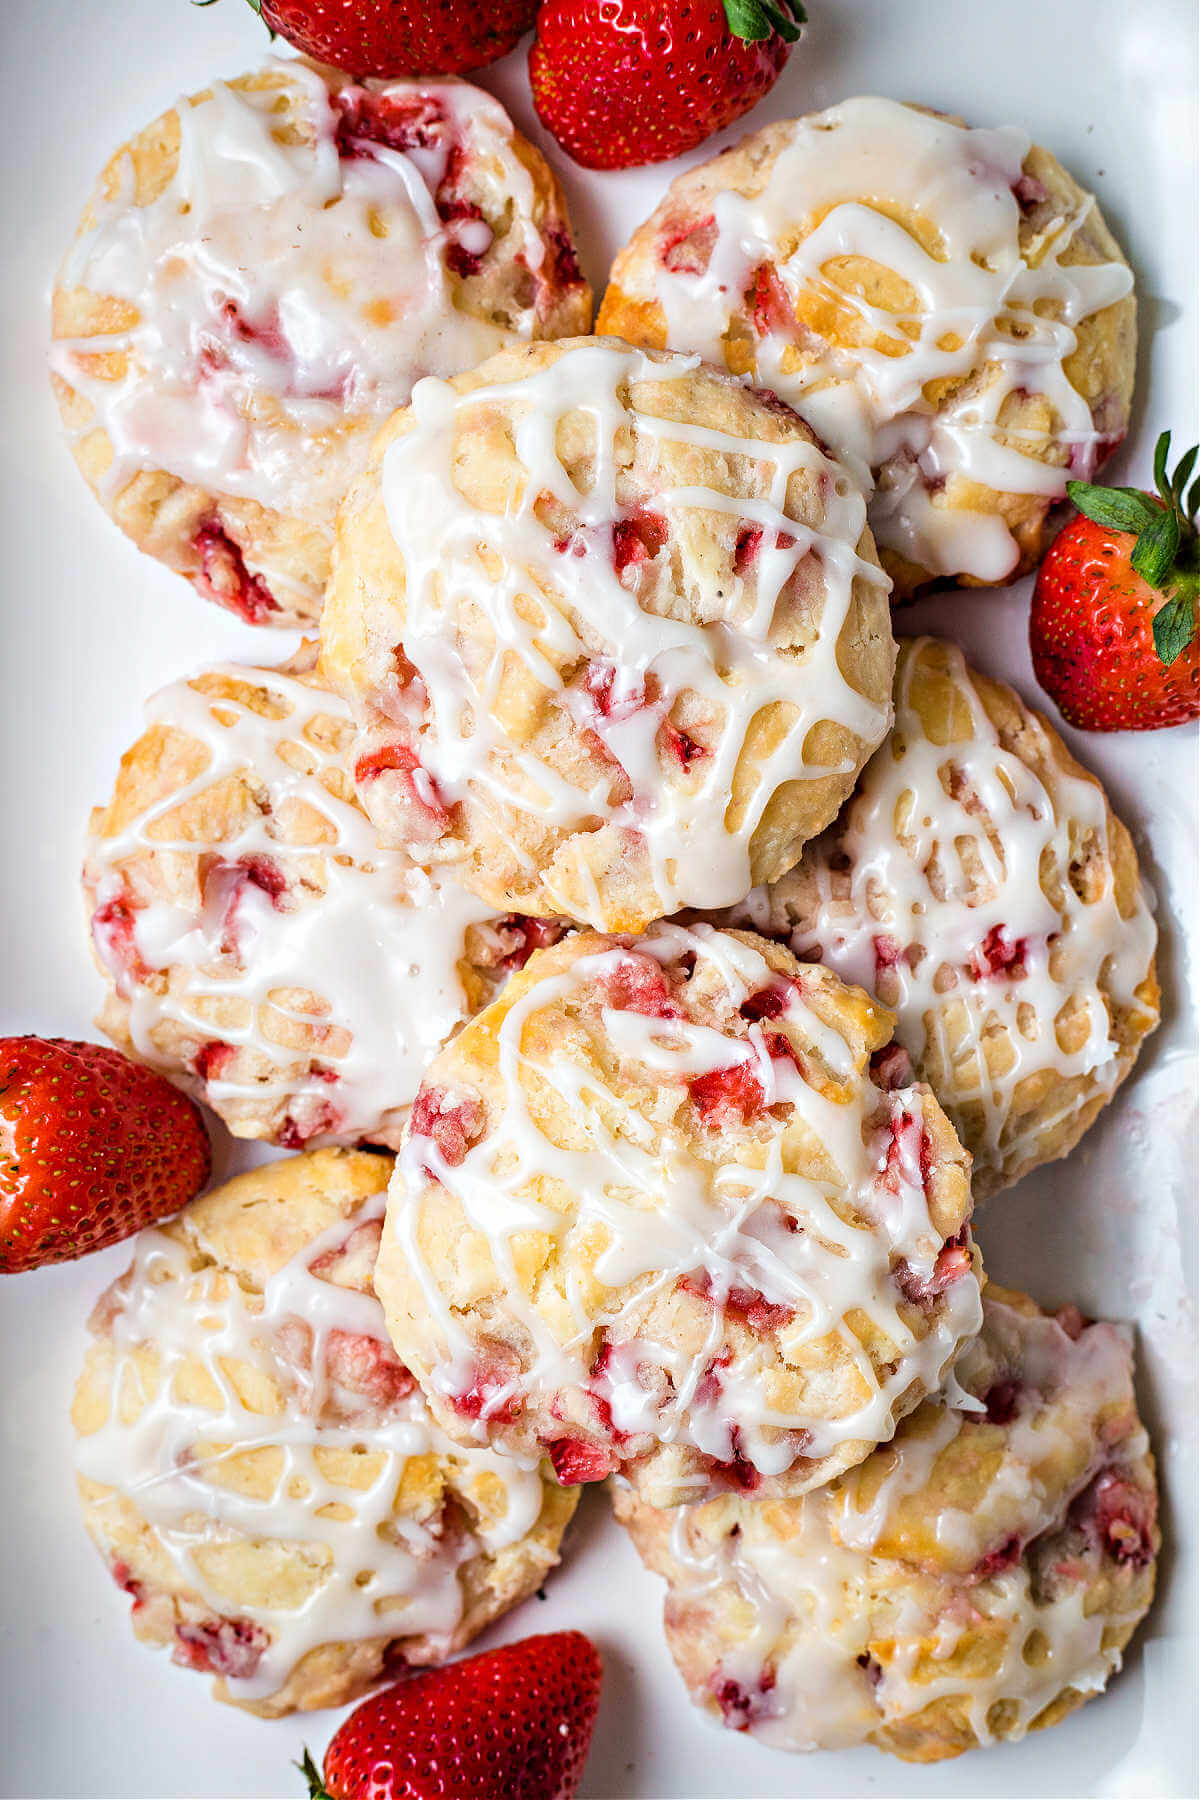 a platter of strawberry biscuits drizzled with a glaze and with whole strawberries garnishing the dish.